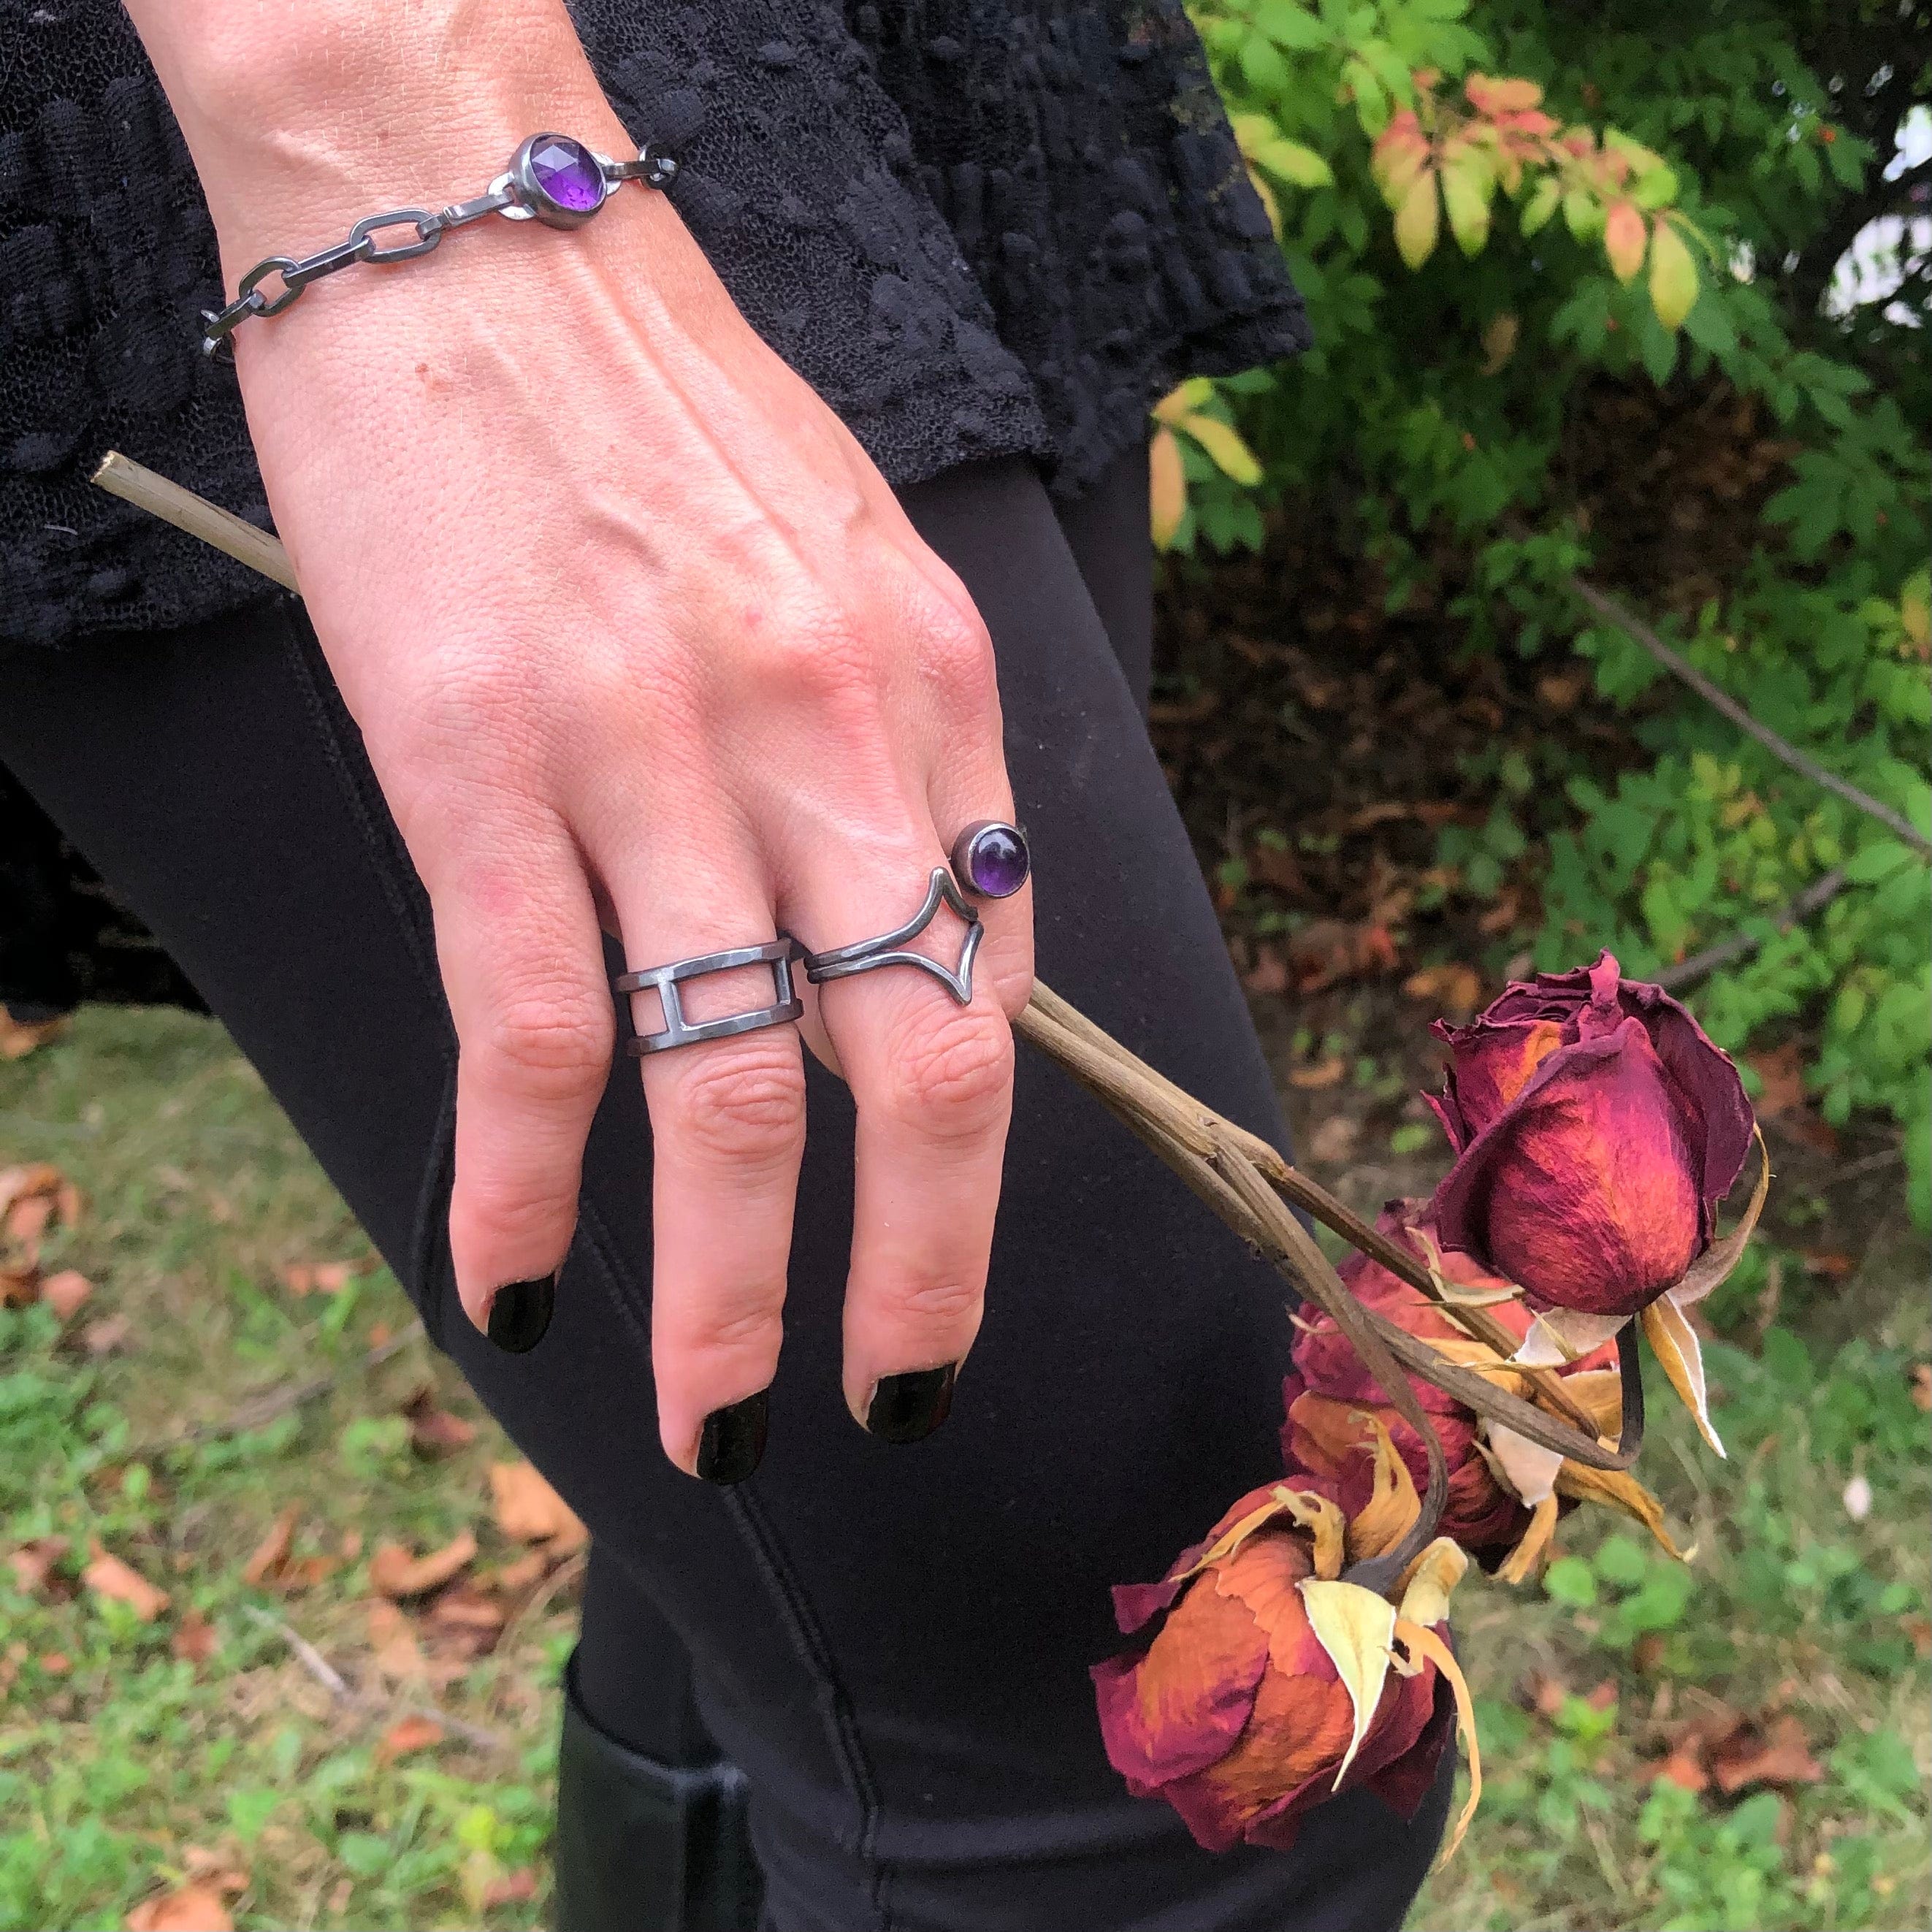 Star Child Ring worn with Amethyst Amulet Ring, Amethyst Amulet Bracelet + 4 Directions Ring.  Part of the Season of the Witch Collection by Alex Lozier Jewelry.